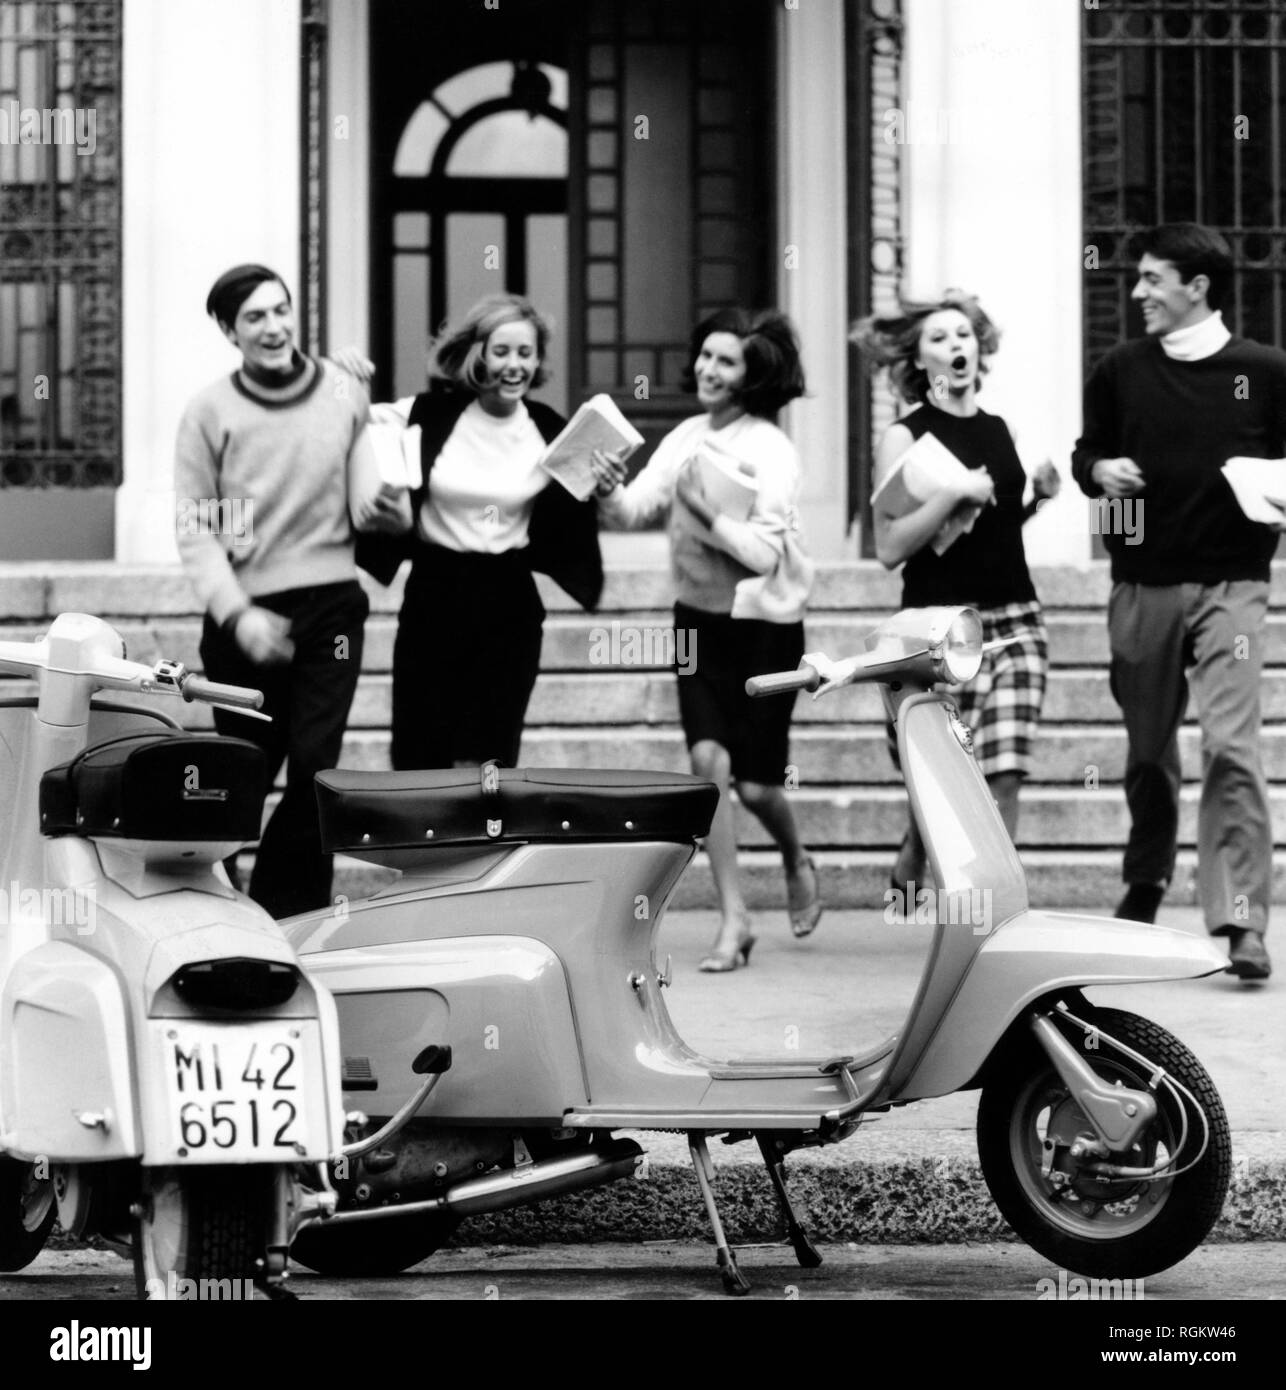 young people out of school, Italy 1964 Stock Photo